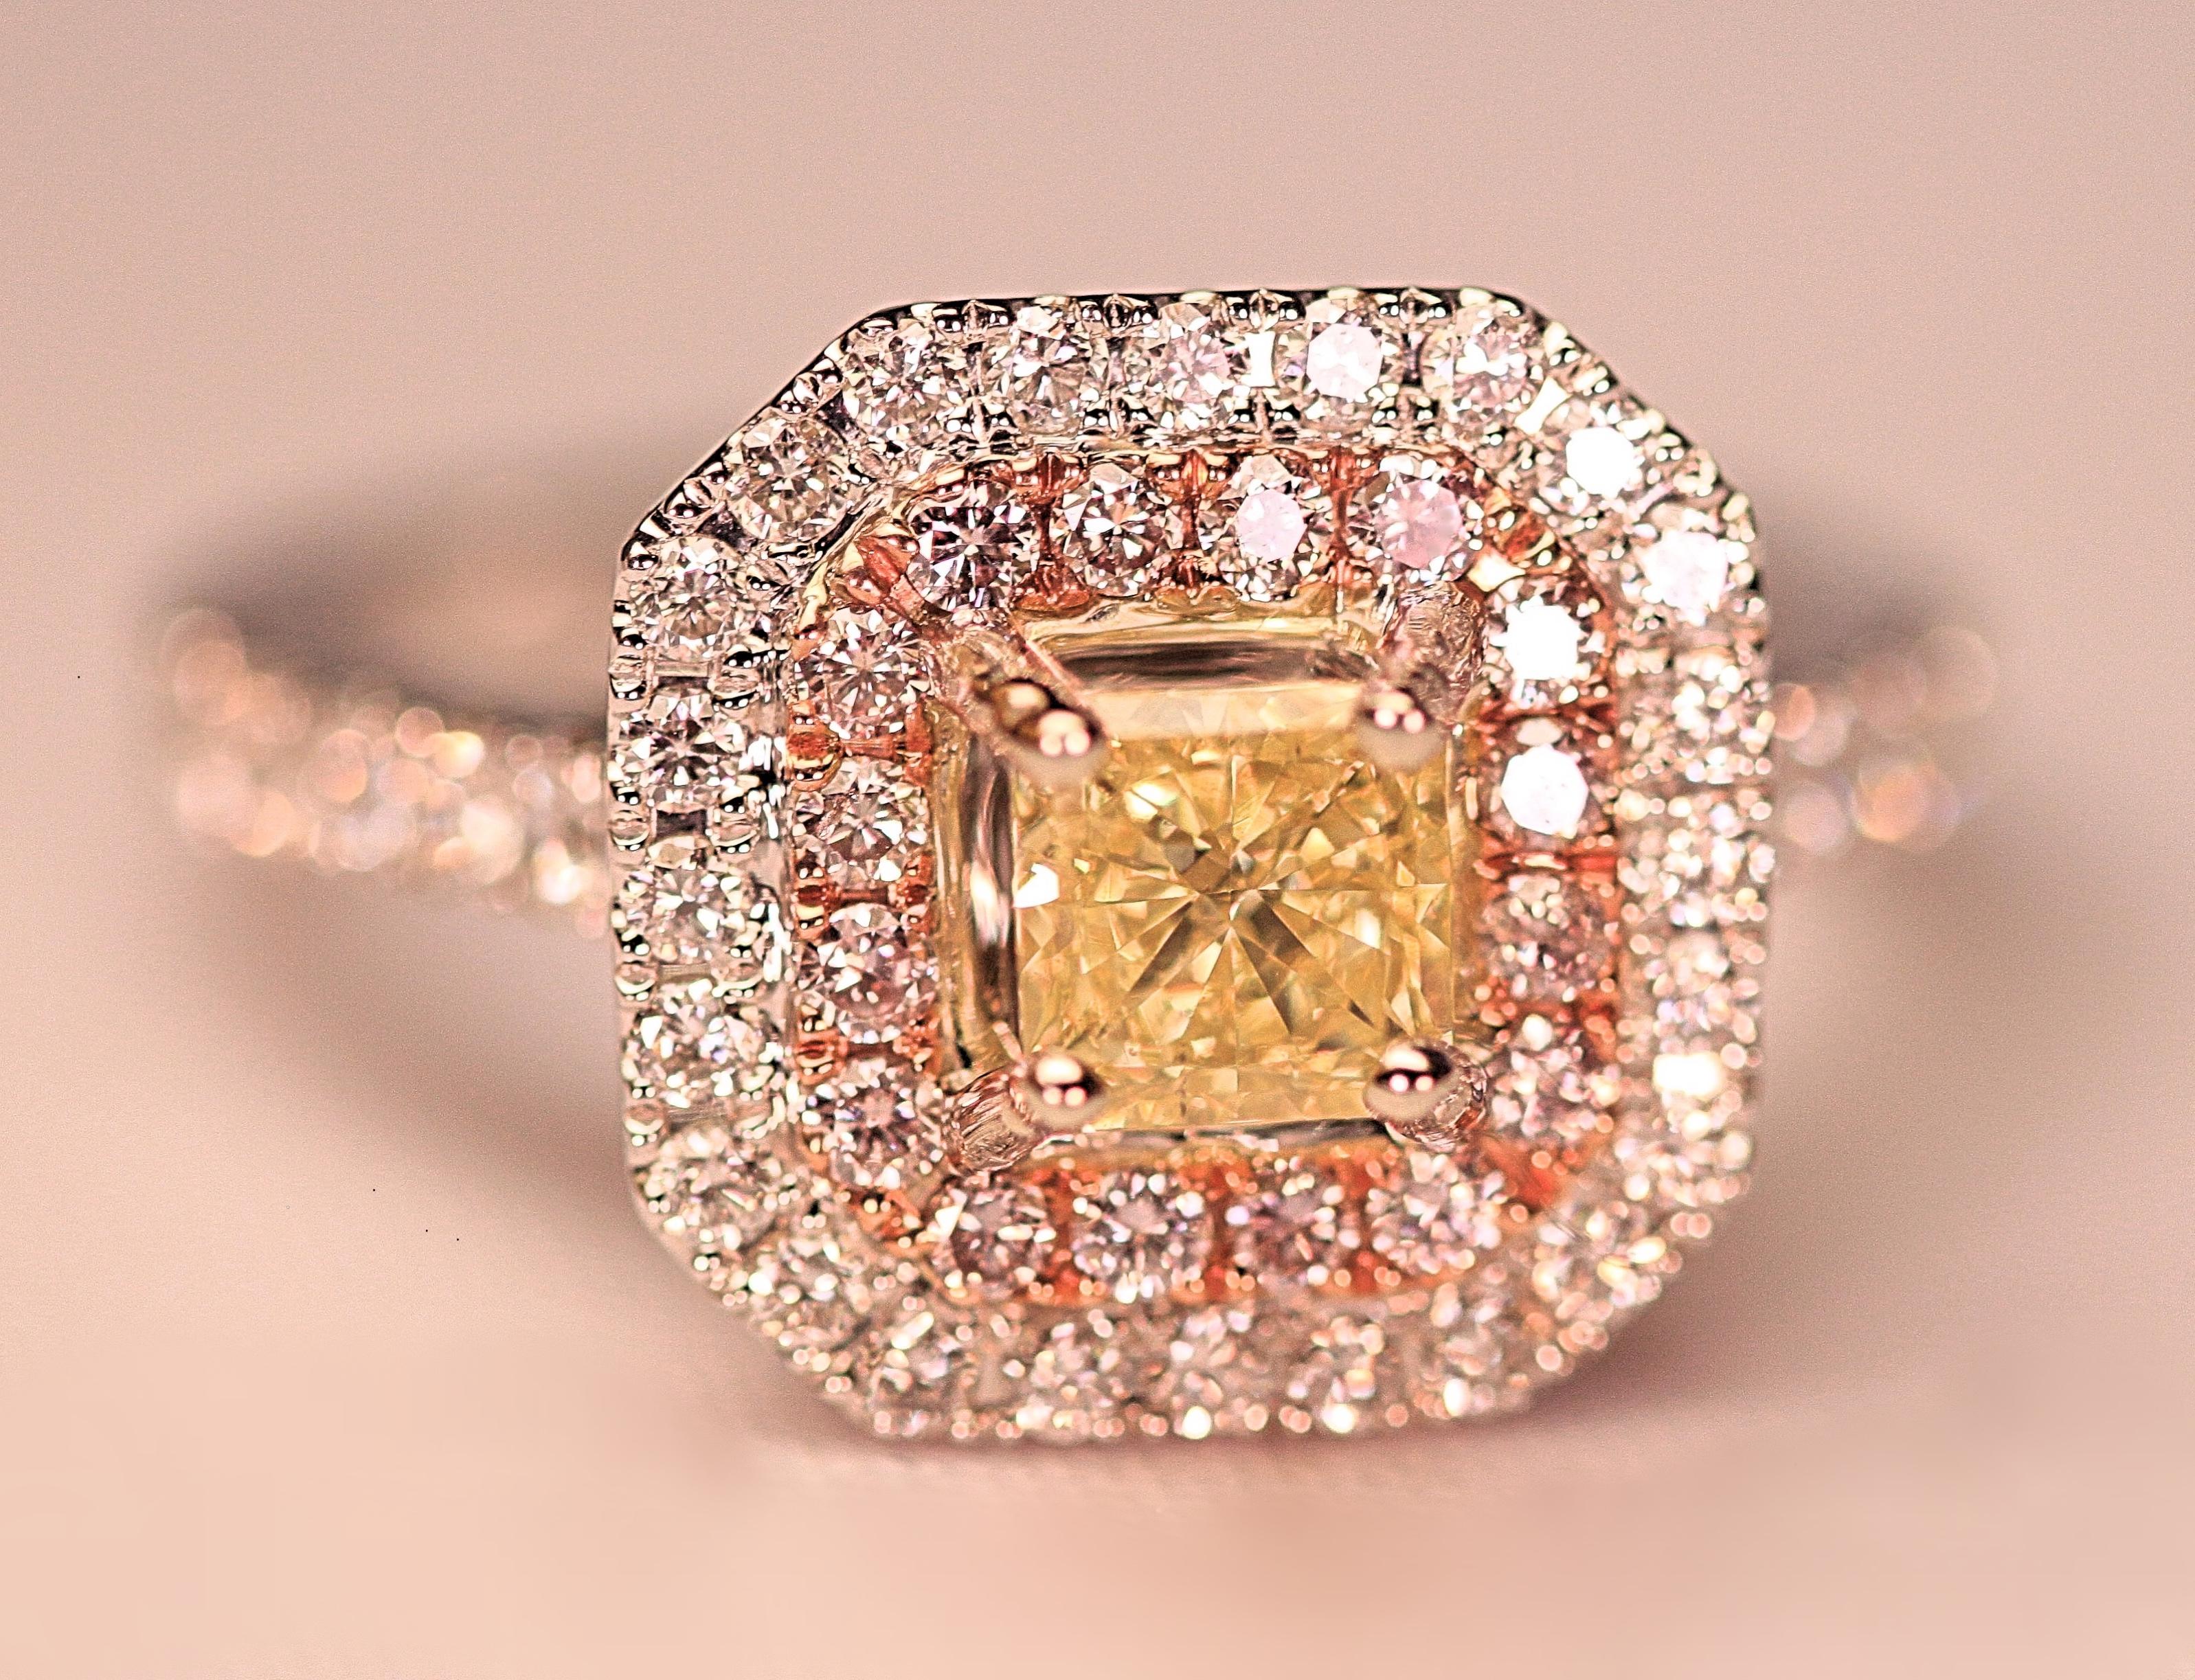 The ring that has a GIA certificate on the center radiant cut diamond. The certificate grades the center diamond as a natural fancy intense yellow diamond. The diamond weighs .83 carat total with a clarity grading of VS2. The fancy yellow is